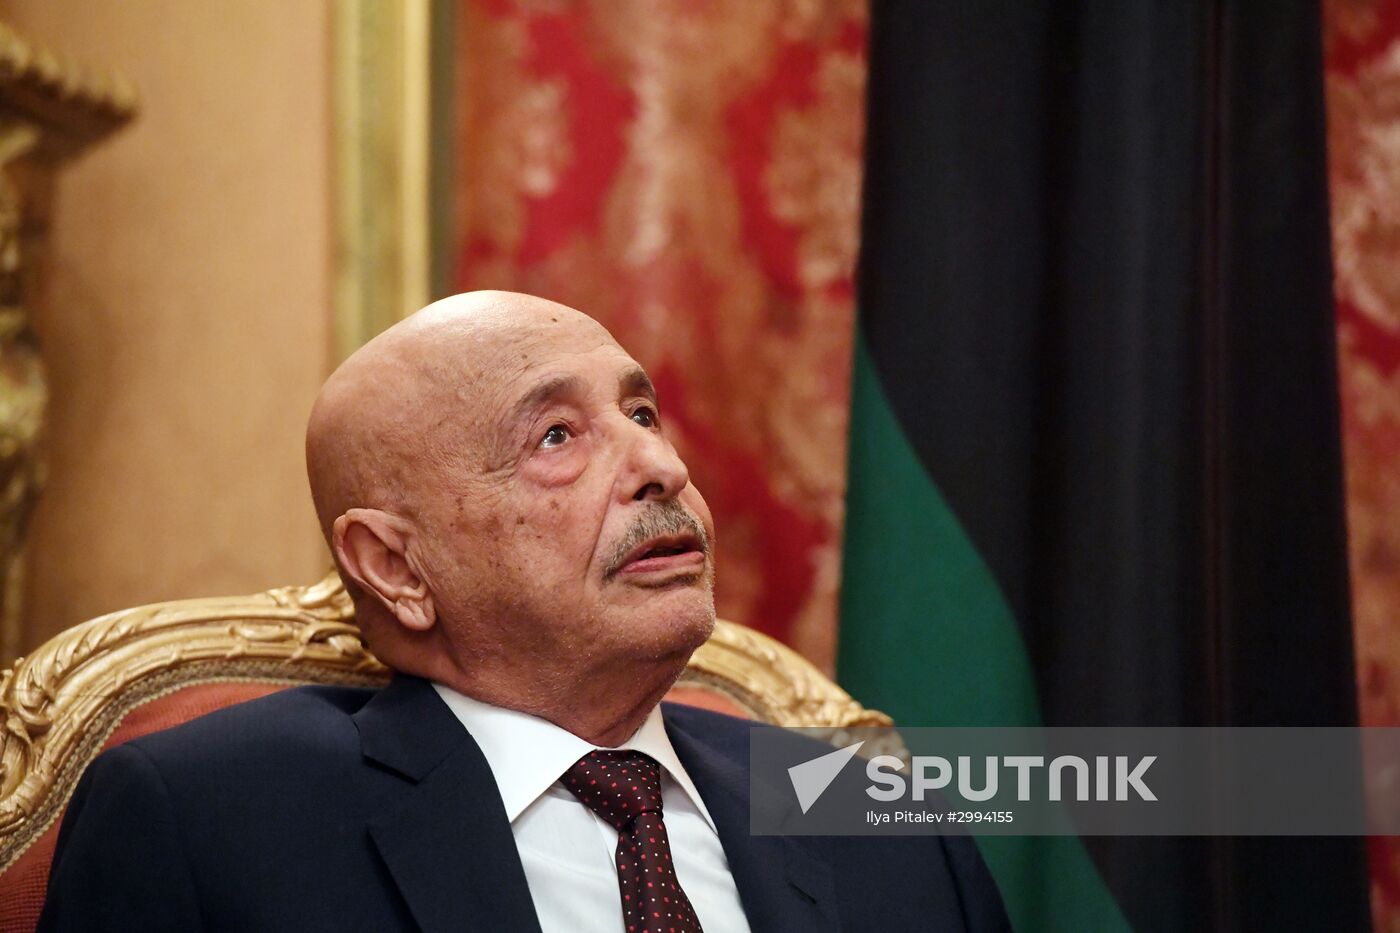 Sergei Lavrov meets with President of the Libyan House of Representatives Aguila Saleh Issa